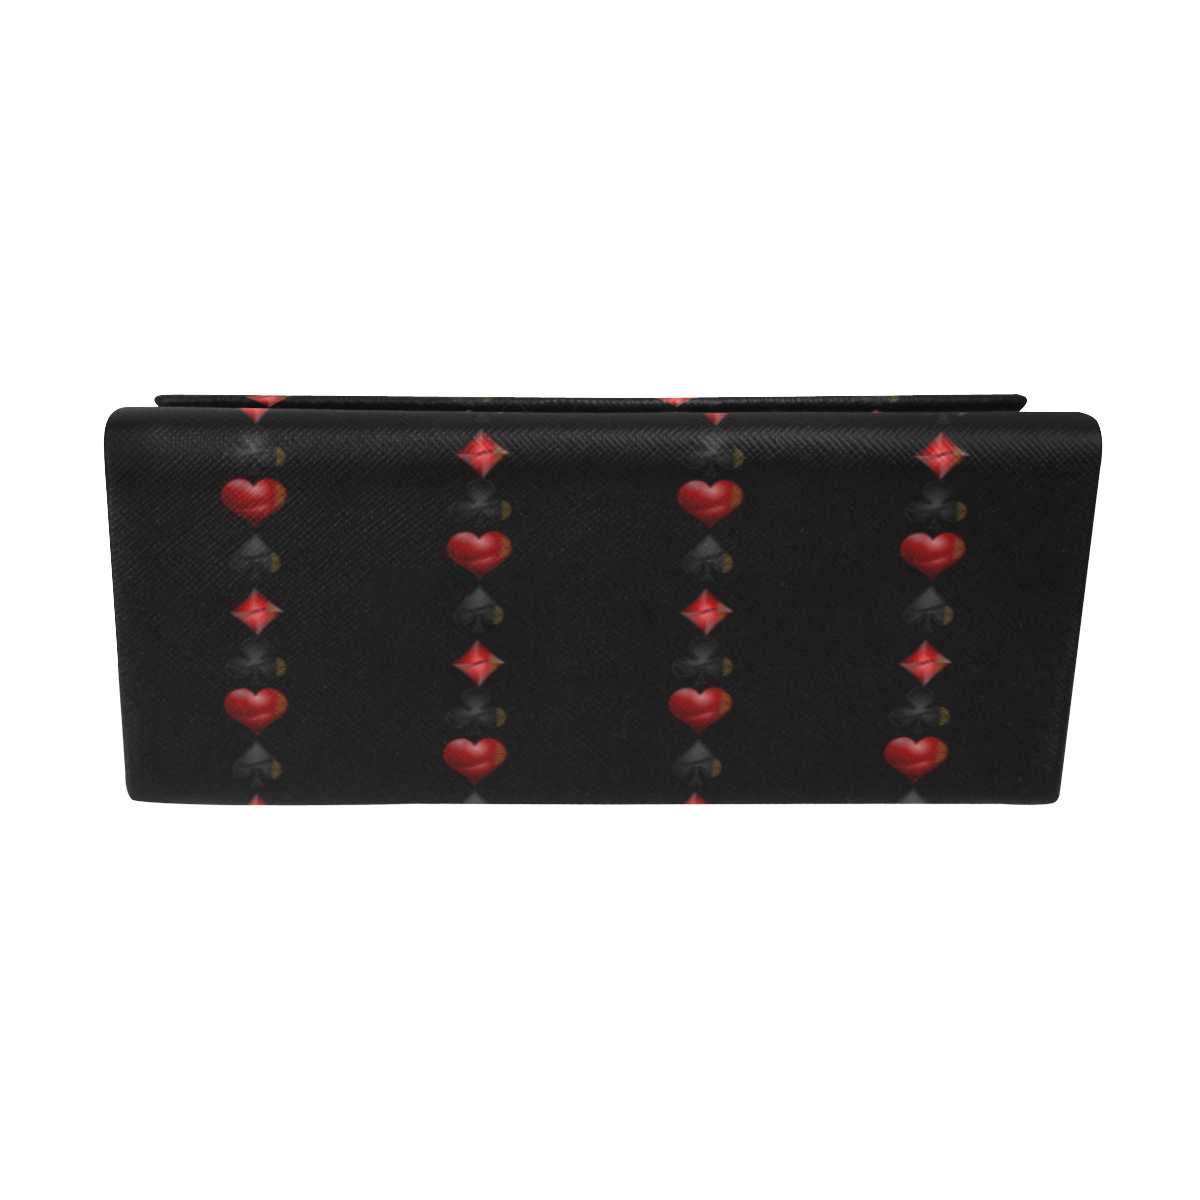 Black and Red Casino Poker Card Shapes Custom Foldable Glasses Case